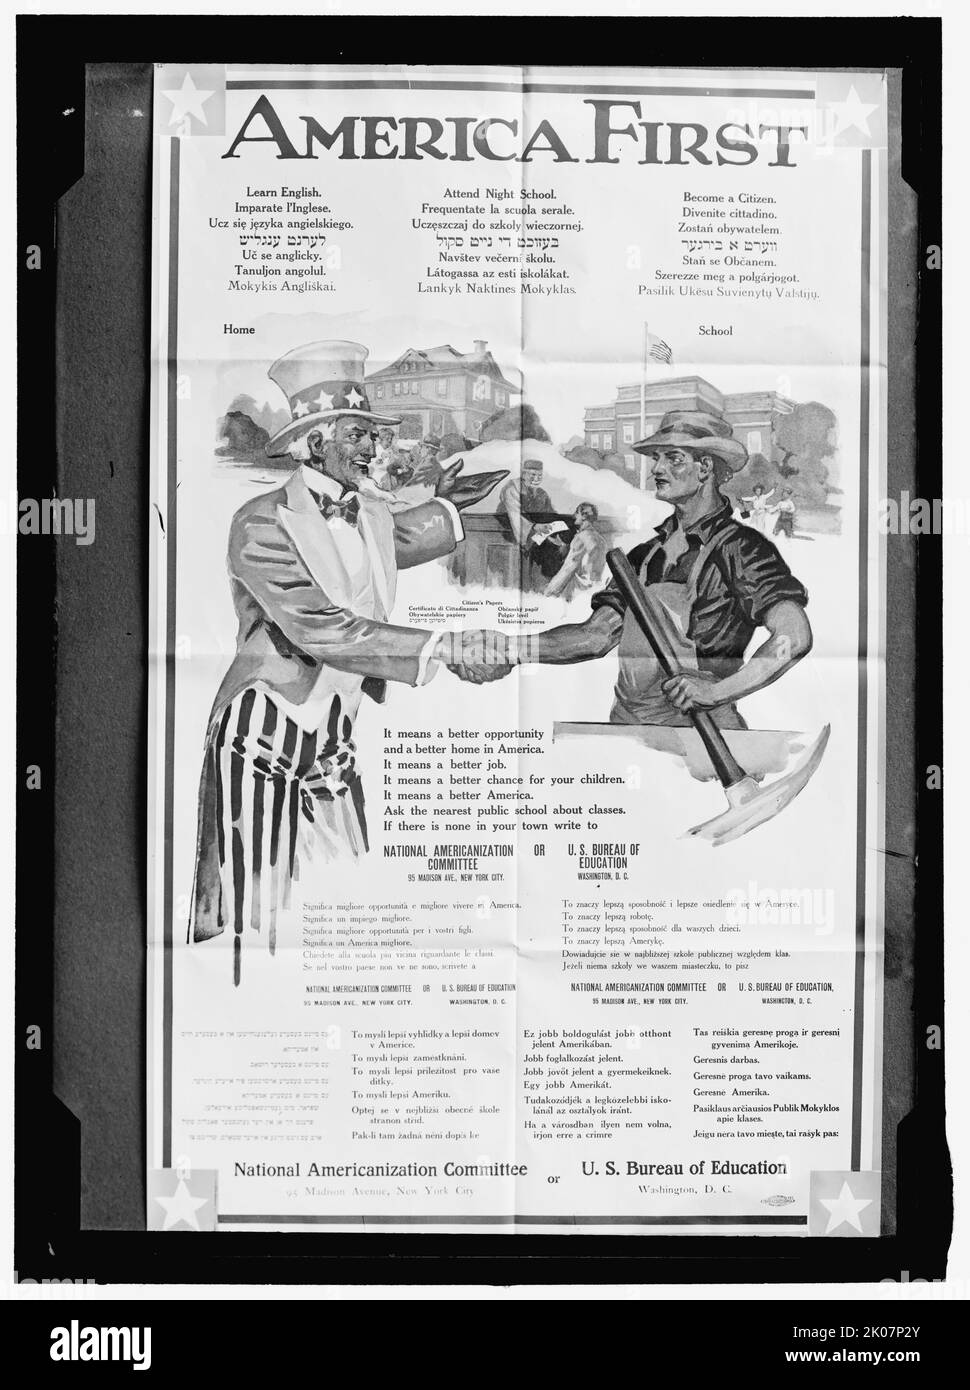 America First poster, between 1911 and 1920. Uncle Sam shaking a European immigrant by the hand, with text in multiple languages including Italian, Polish, Hebrew, Czech, Hungarian and Lithuanian: 'Learn English; Attend Night School; Become a Citizen; Citizen's Papers; It means a better opportunity and a better home in America. It means a better job...better chance for your children...better America. Ask the nearest public school about classes. If there is none in your town write to National Americanization Committee or U.S. Bureau of Education'. Stock Photo